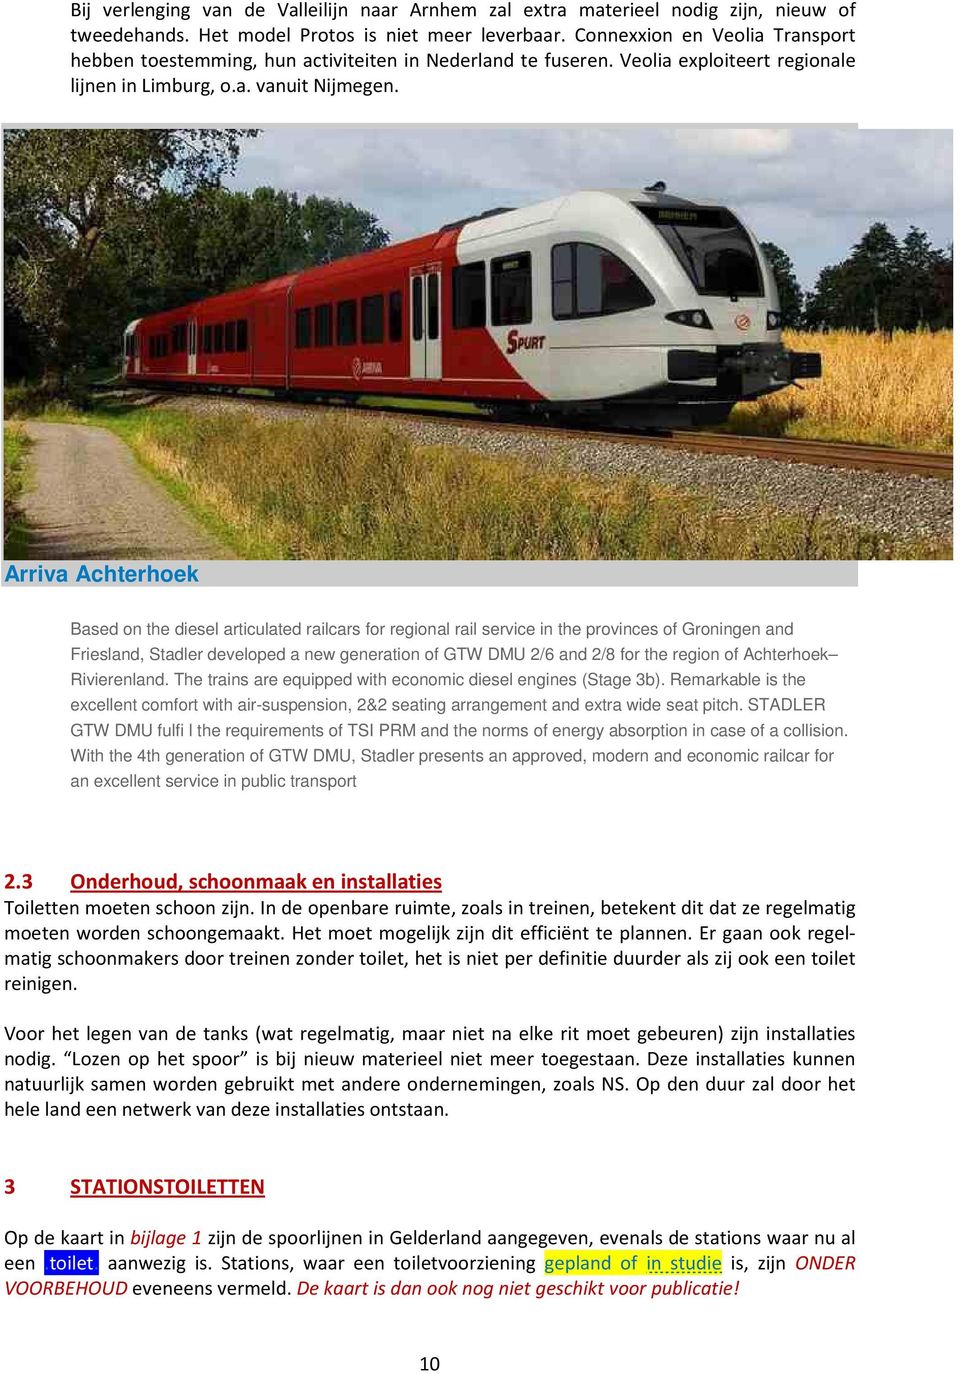 Arriva Achterhoek Based on the diesel articulated railcars for regional rail service in the provinces of Groningen and Friesland, Stadler developed a new generation of GTW DMU 2/6 and 2/8 for the